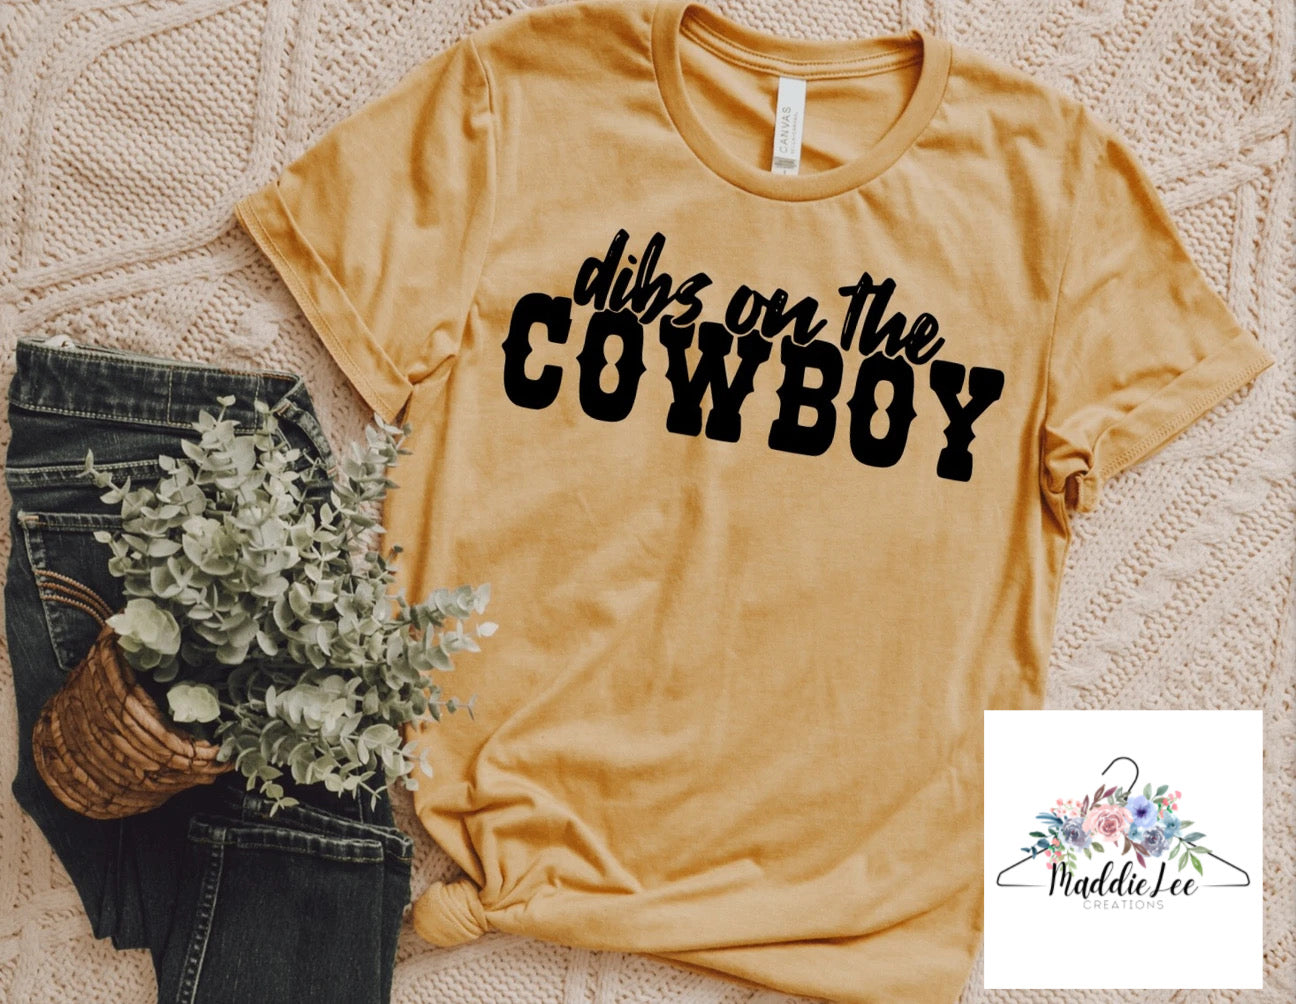 Dibs on the Cowboy Adult Tee